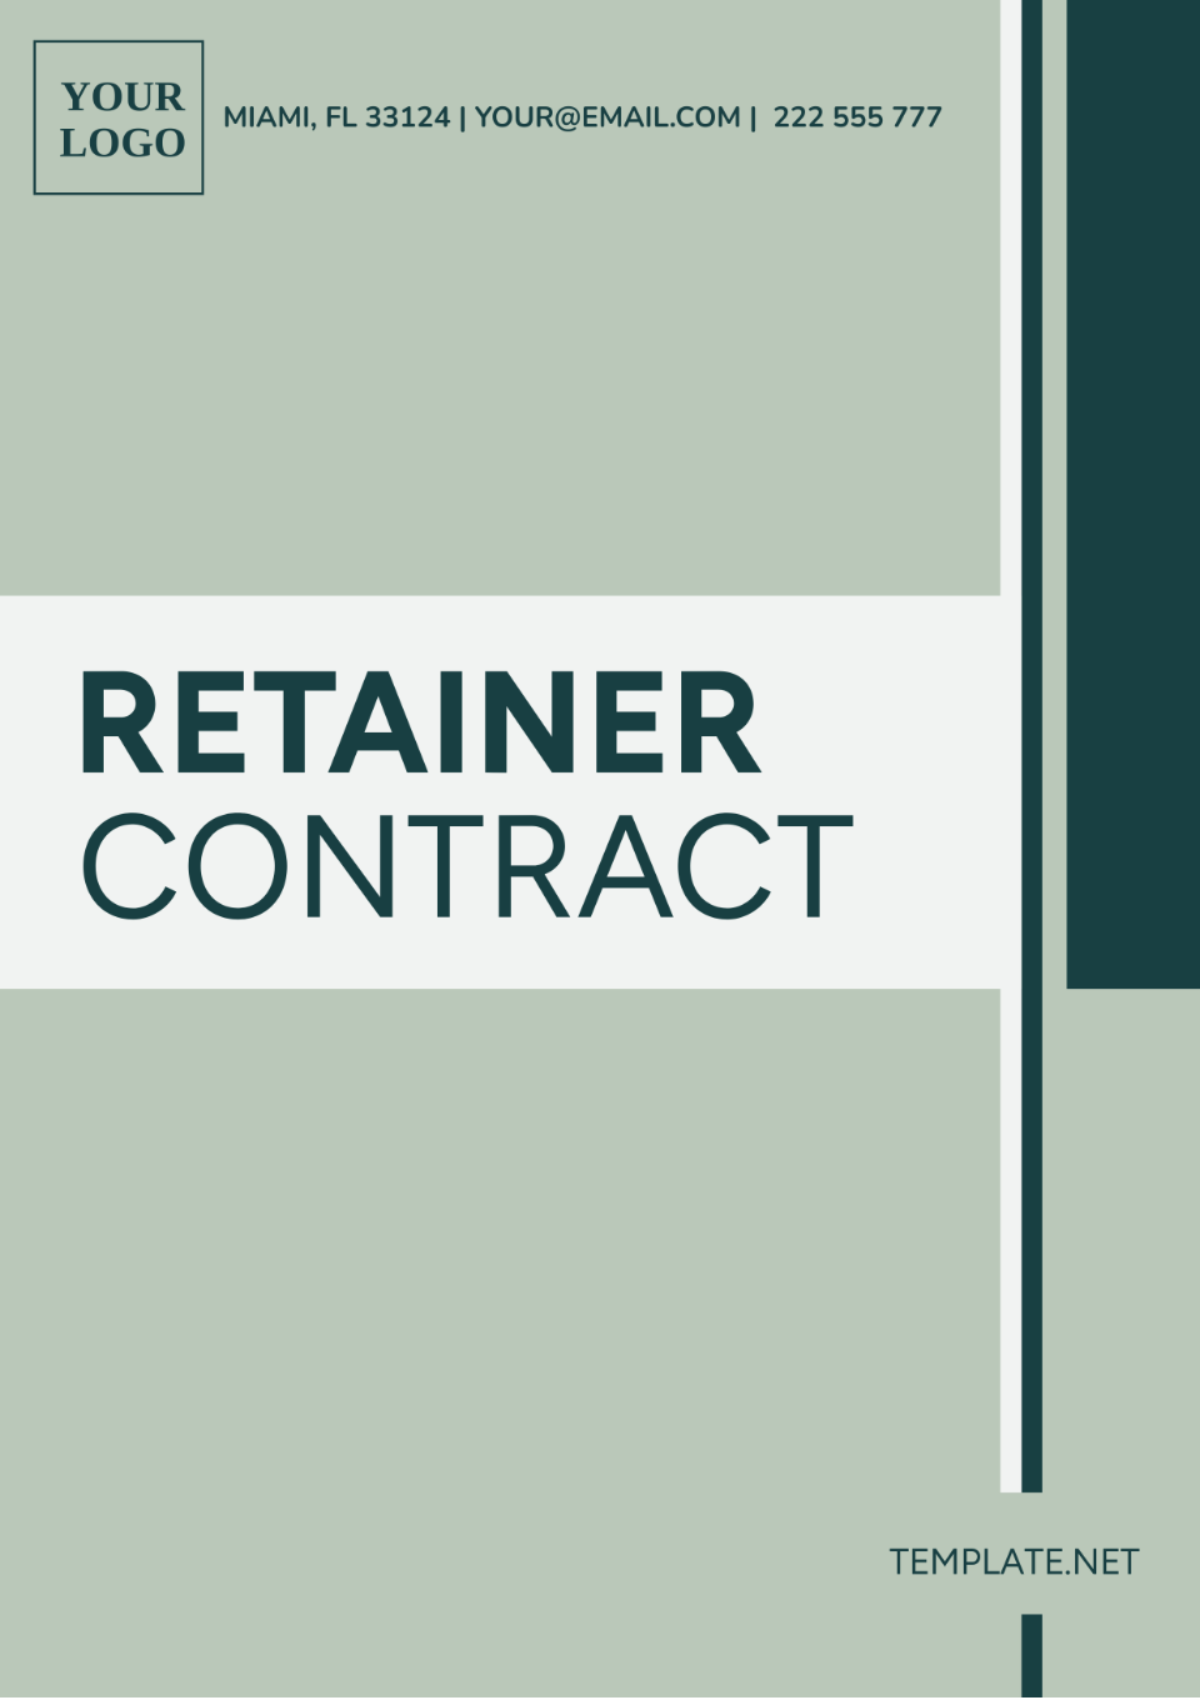 Retainer Contract Template